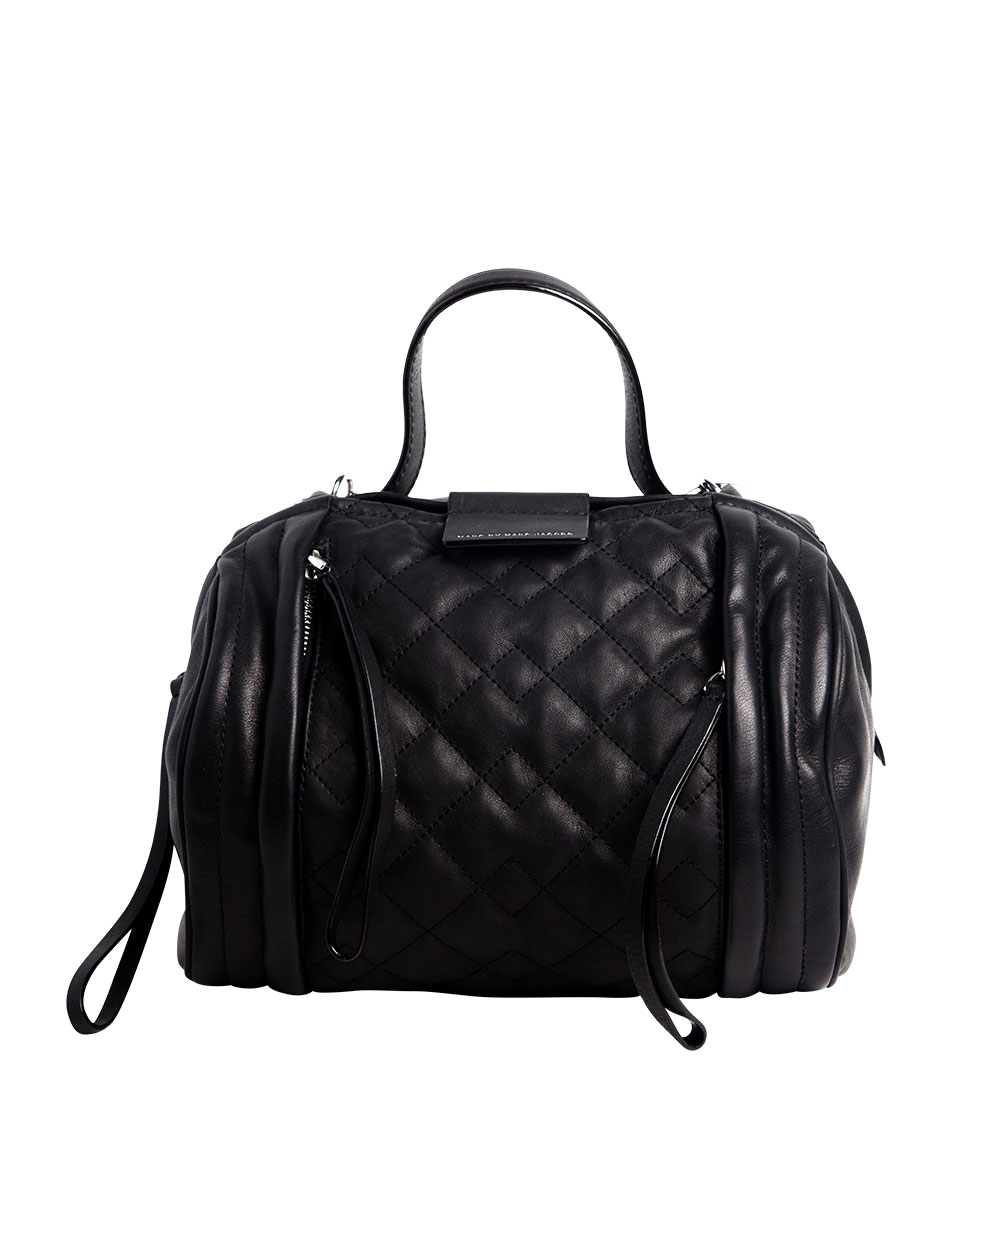 Marc by Marc Jacobs bag, $729, from Workshop.